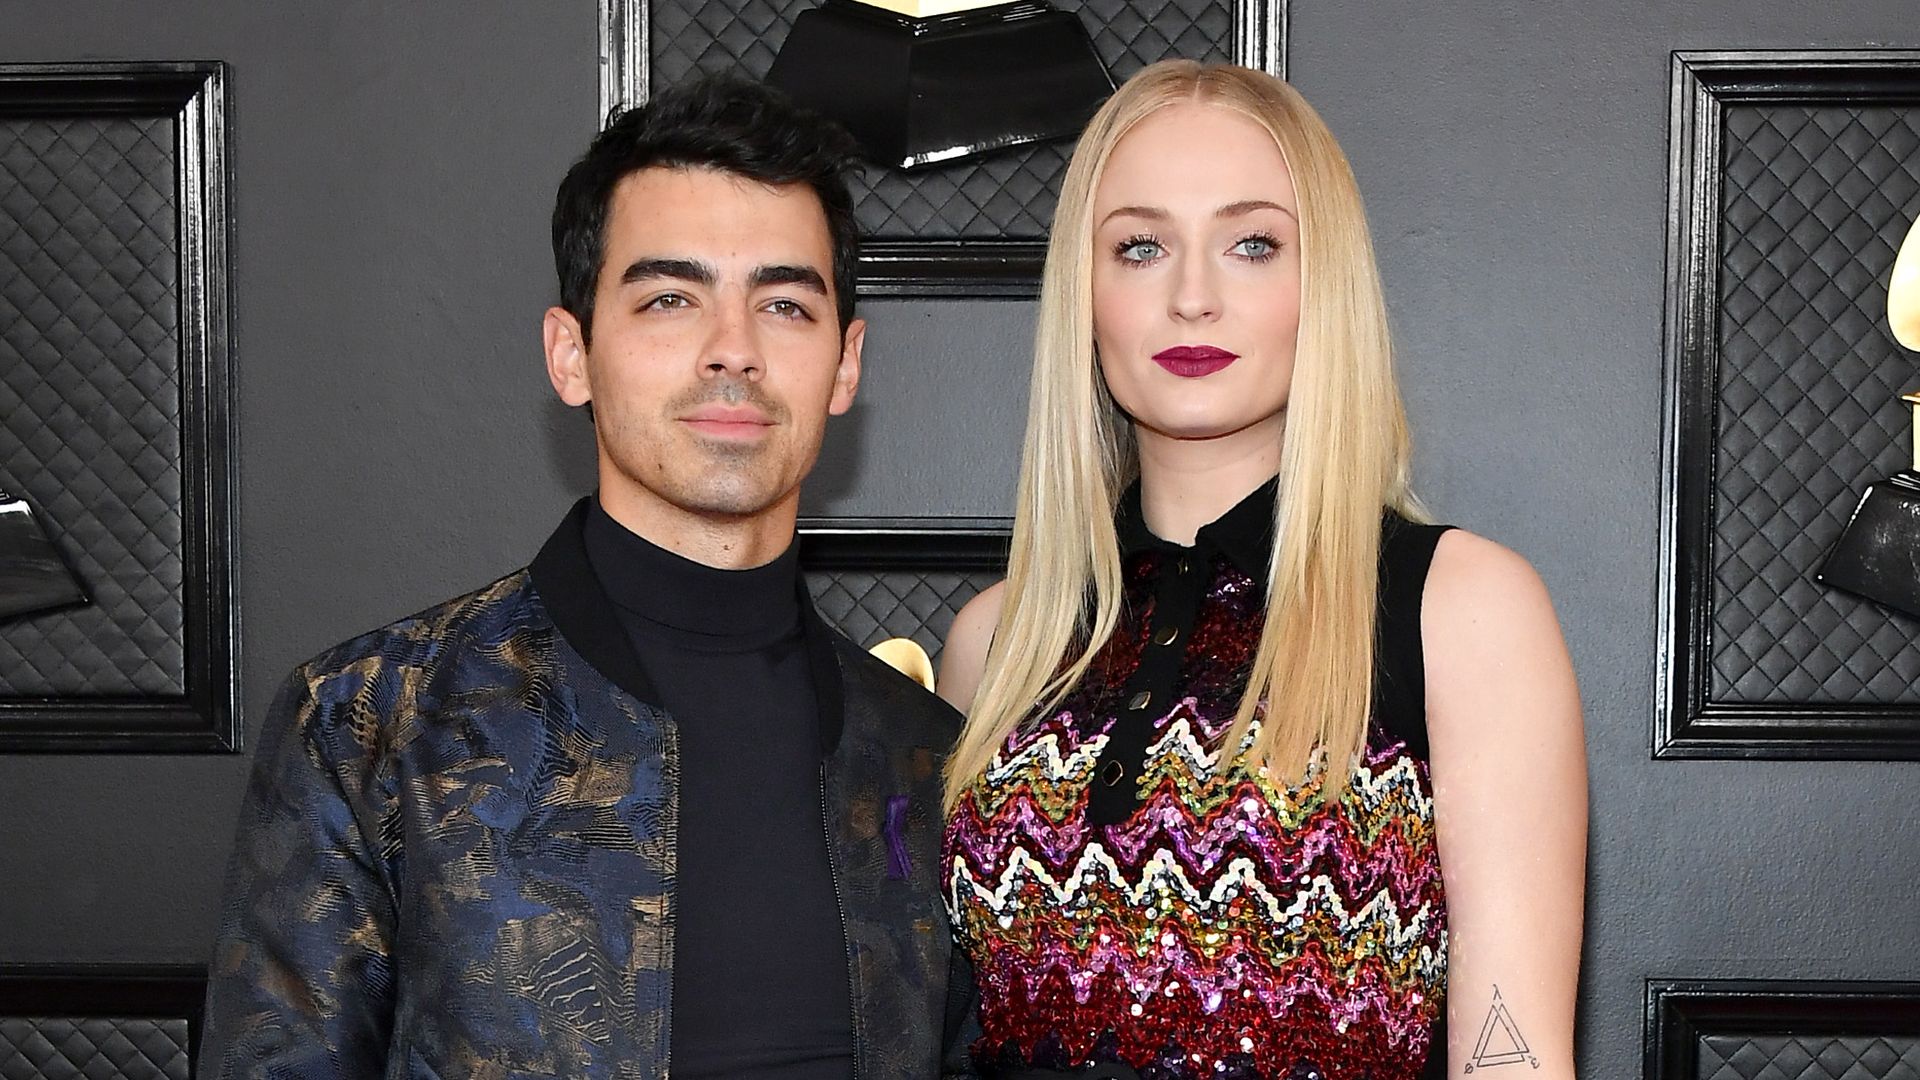 Joe Jonas and Sophie Turner attend the 62nd Annual GRAMMY Awards at Staples Center on January 26, 2020 in Los Angeles, California